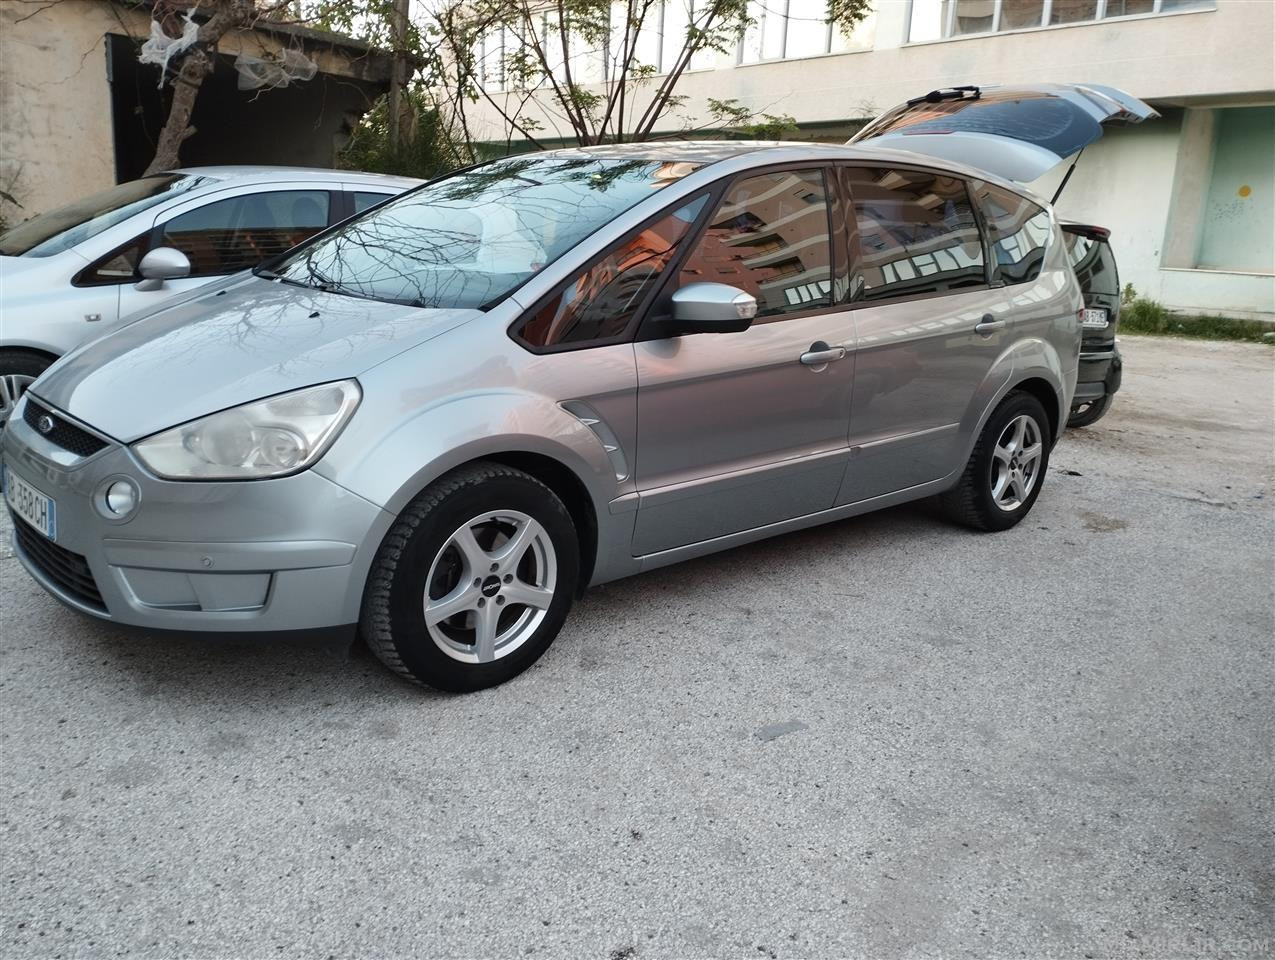 Shes Ford S-max 2.0 TDCI Nafte Viti 2008 Automat